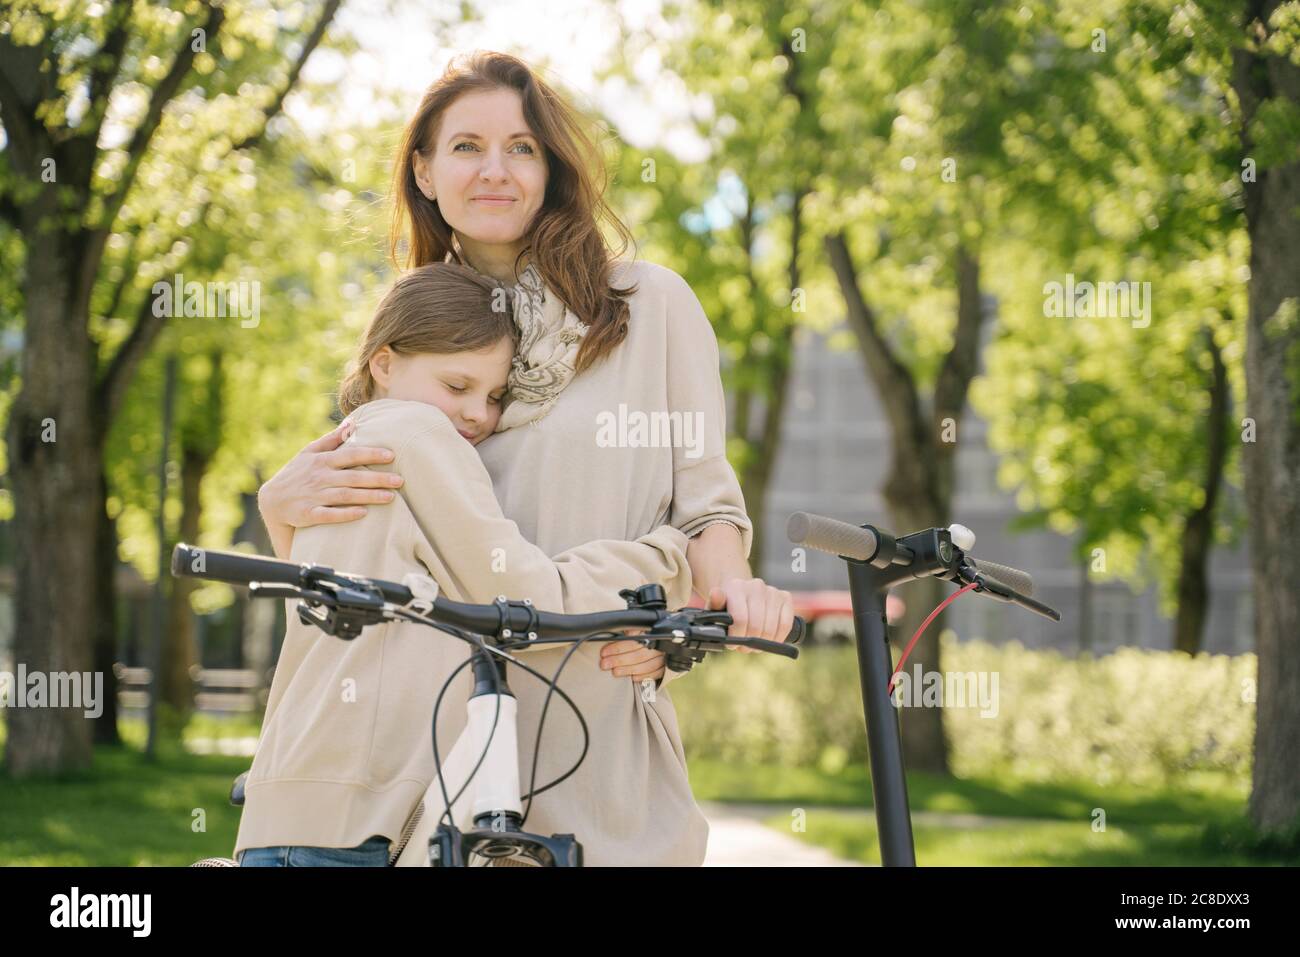 Mother and daughter embracing while spending leisure time in city park Stock Photo